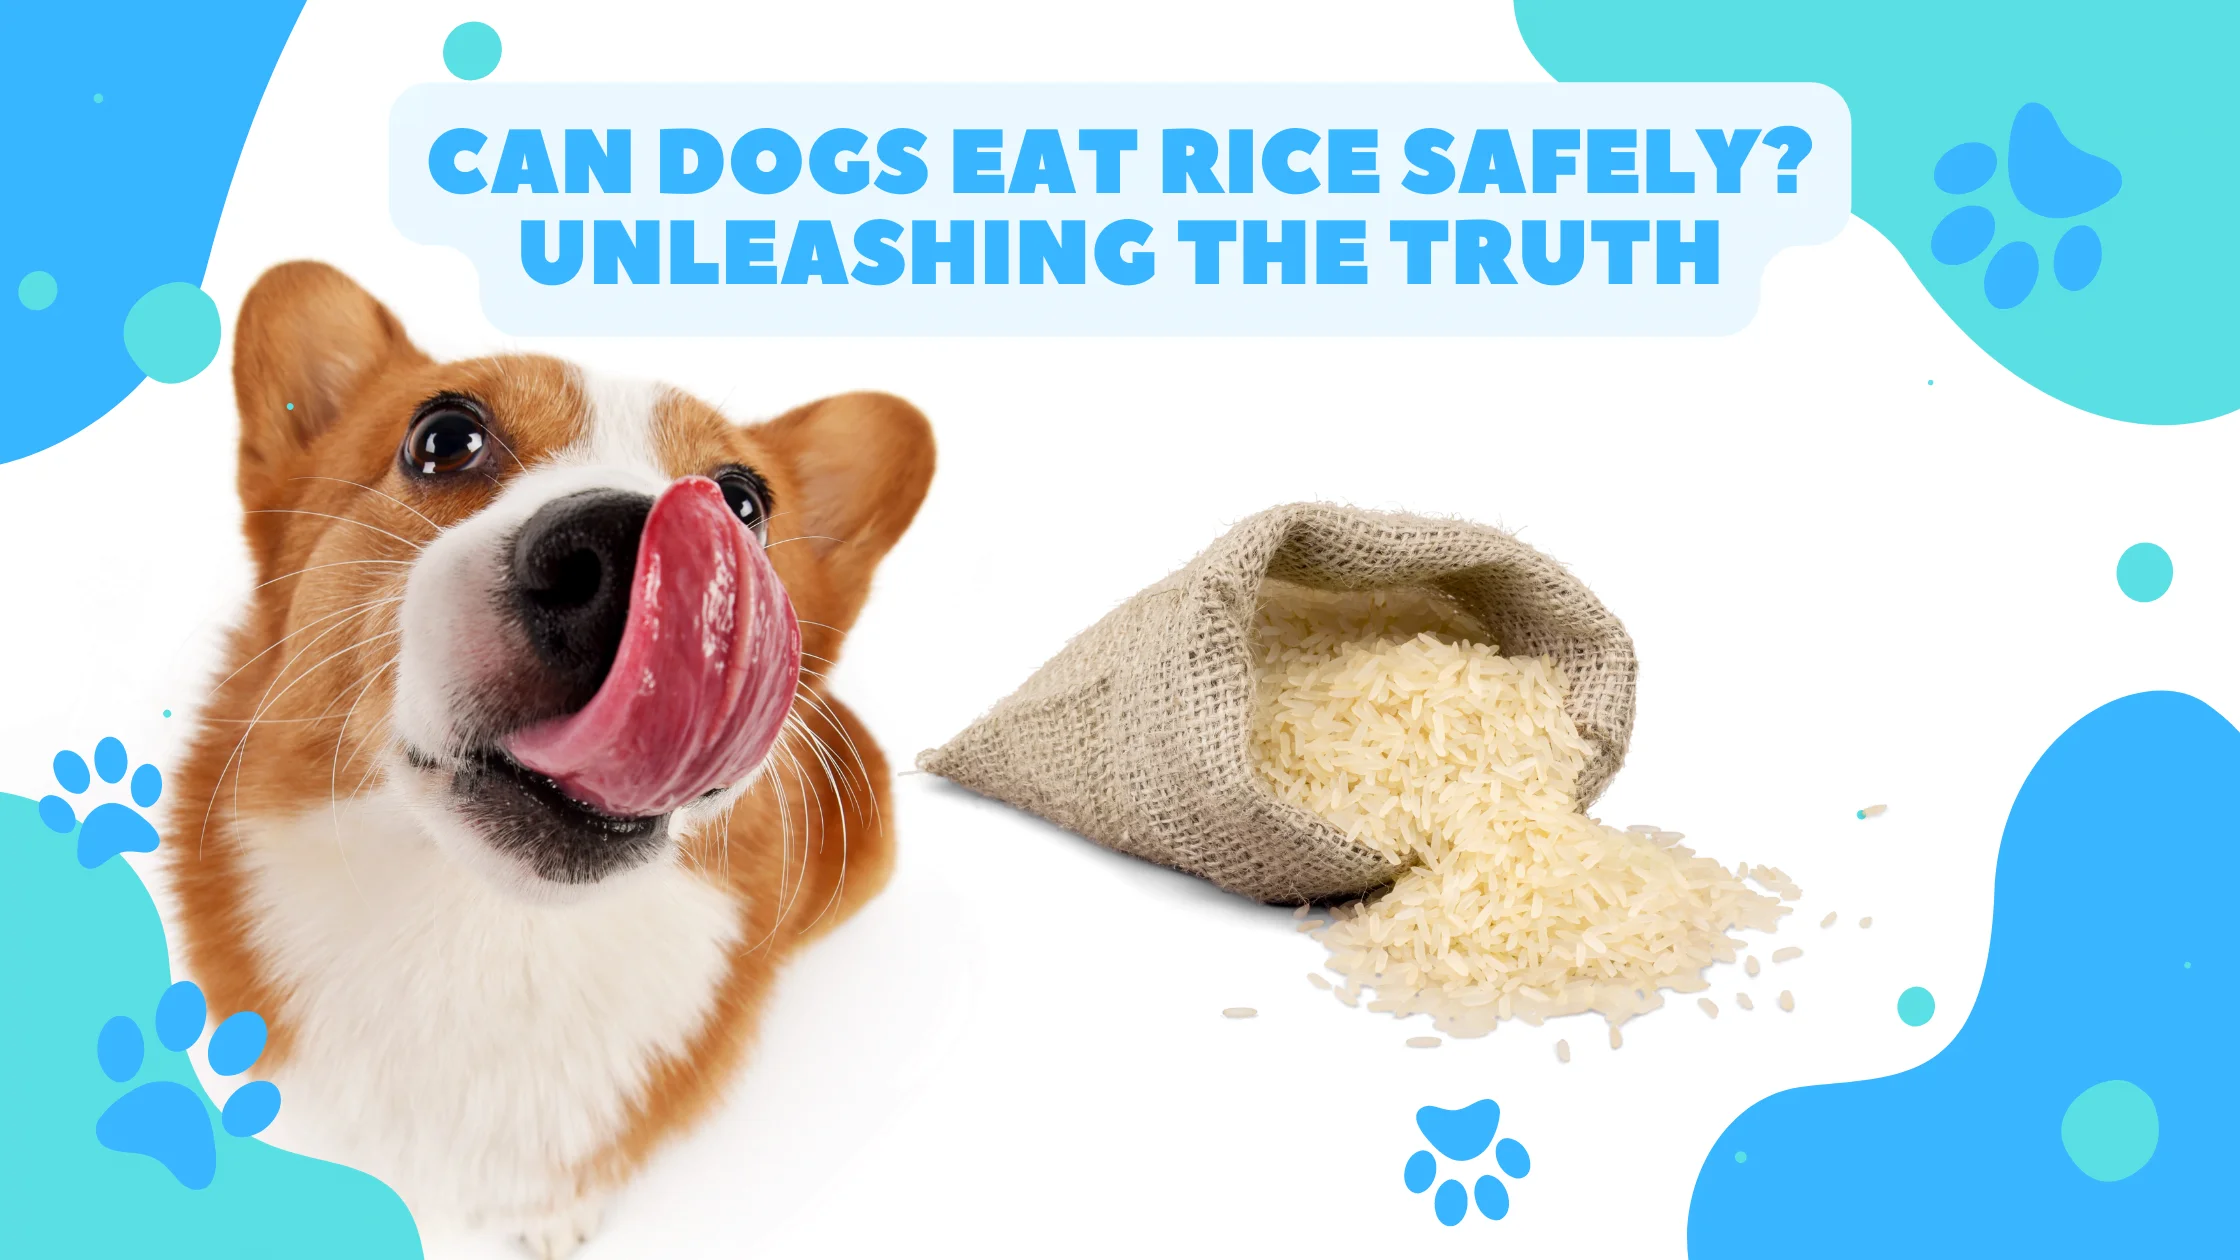 Can Dogs Eat Rice Safely? Unleashing the Truth